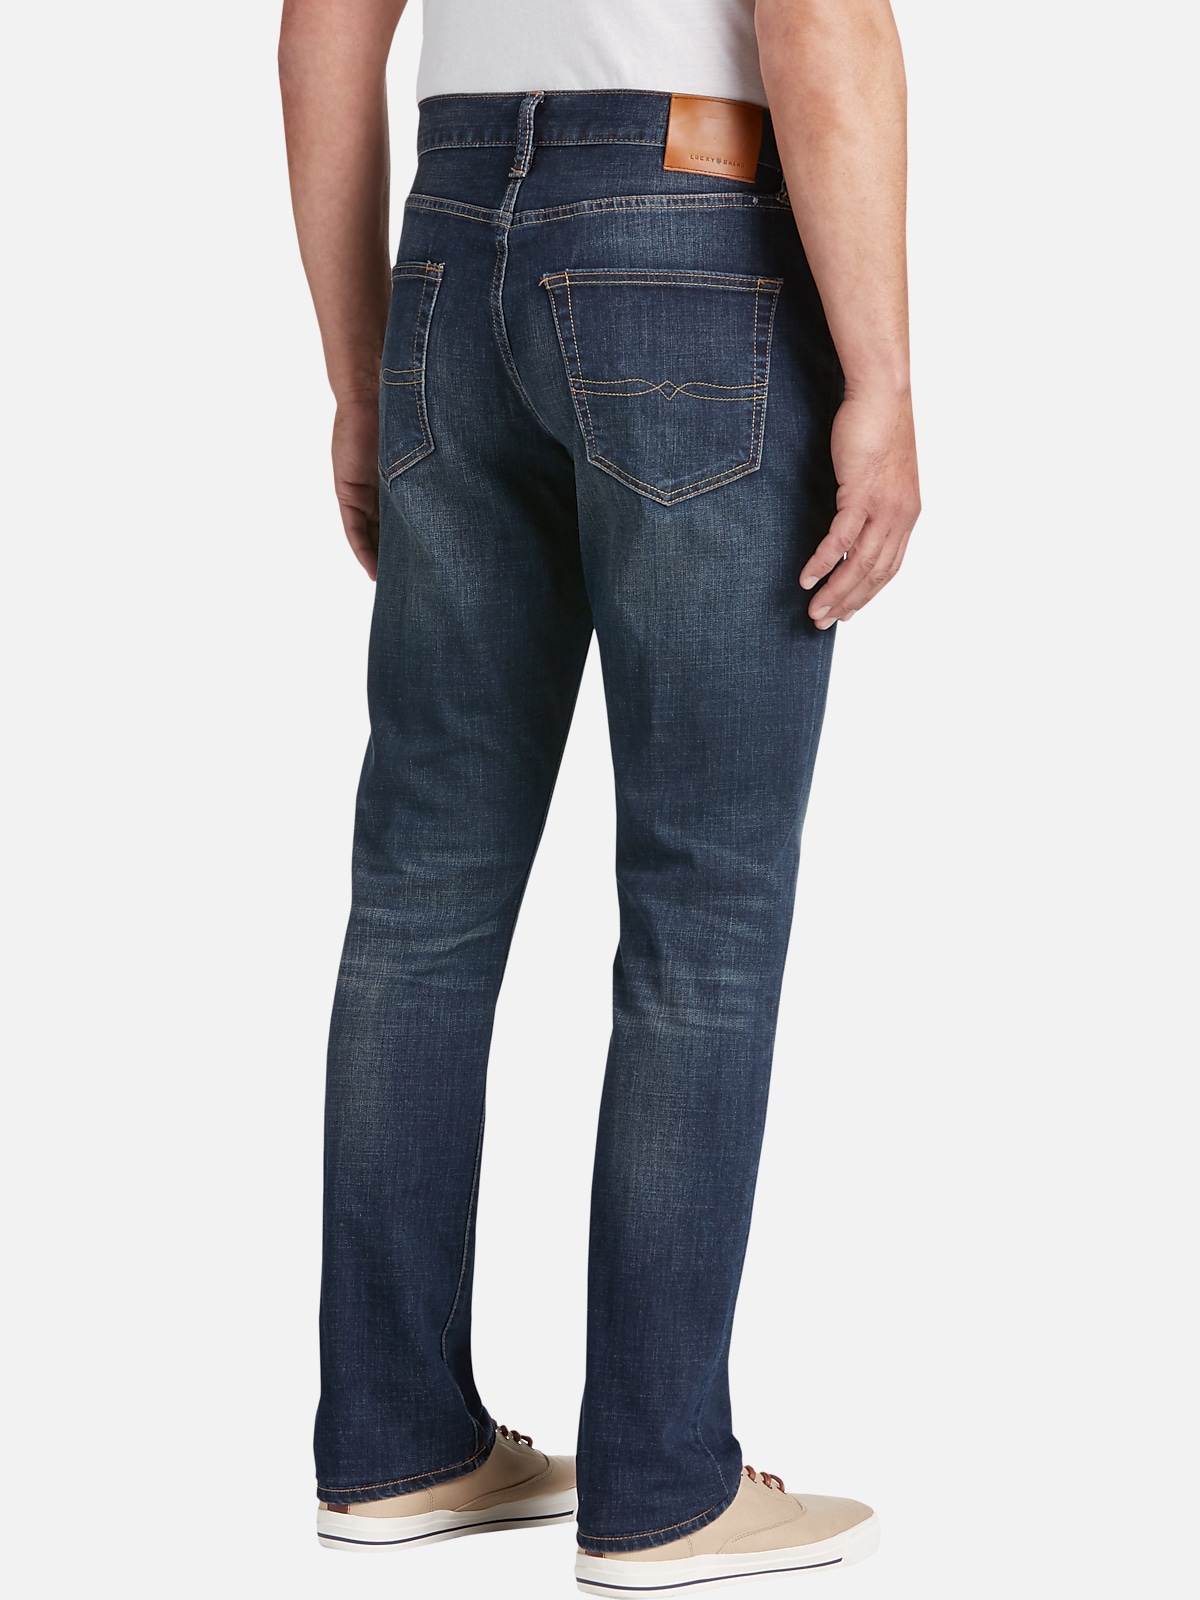 Lucky Brand mens jeans - Jeans